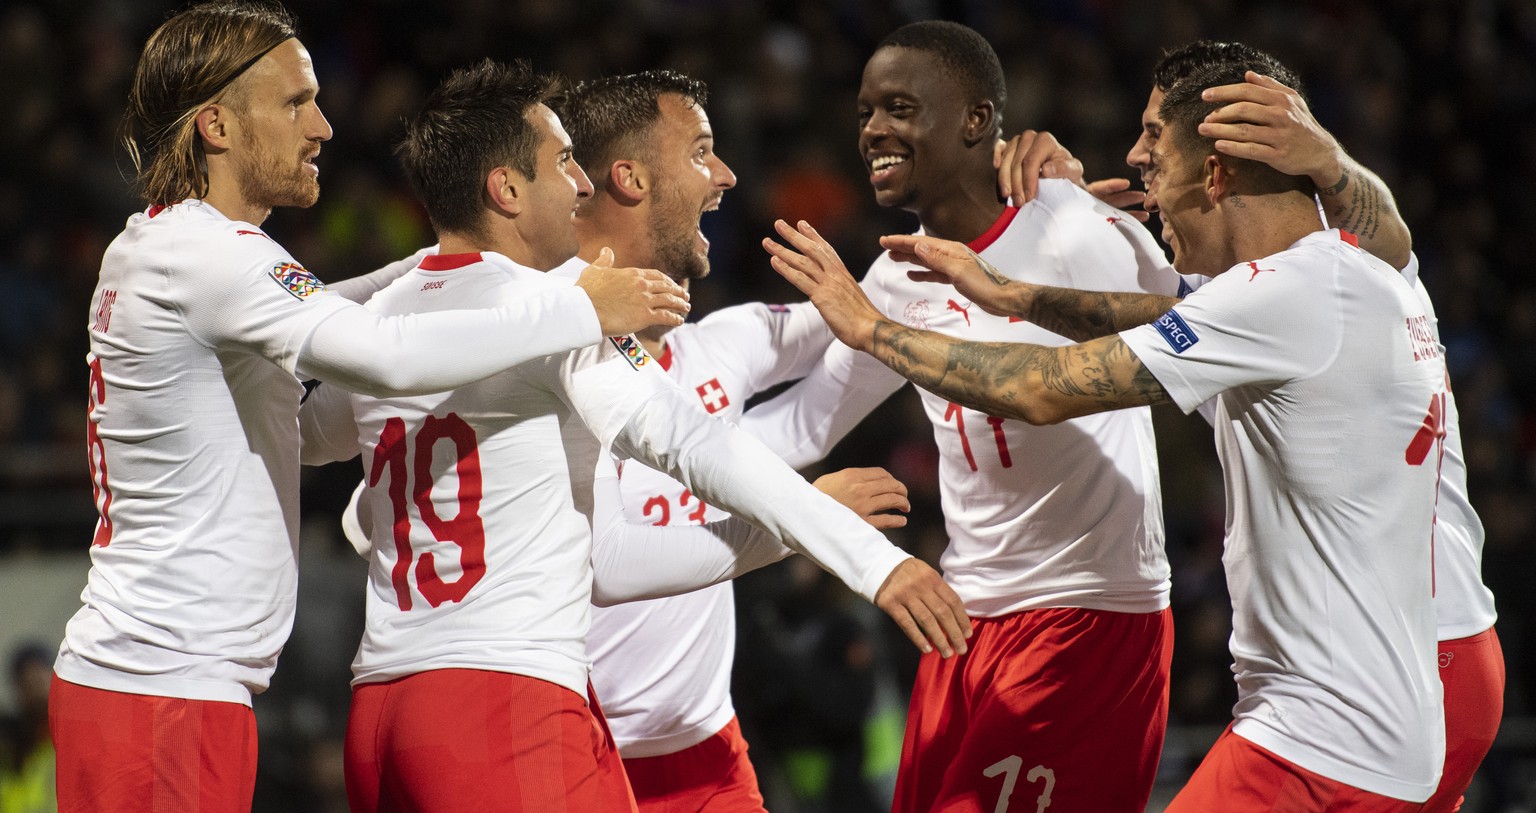 Switzerland&#039;s Haris Seferovic, center, celebrate his 1:0 goal during the UEFA Nations League soccer match between Iceland and Switzerland at the Laugardalsvoellur stadium in Reykjavik, Iceland, o ...